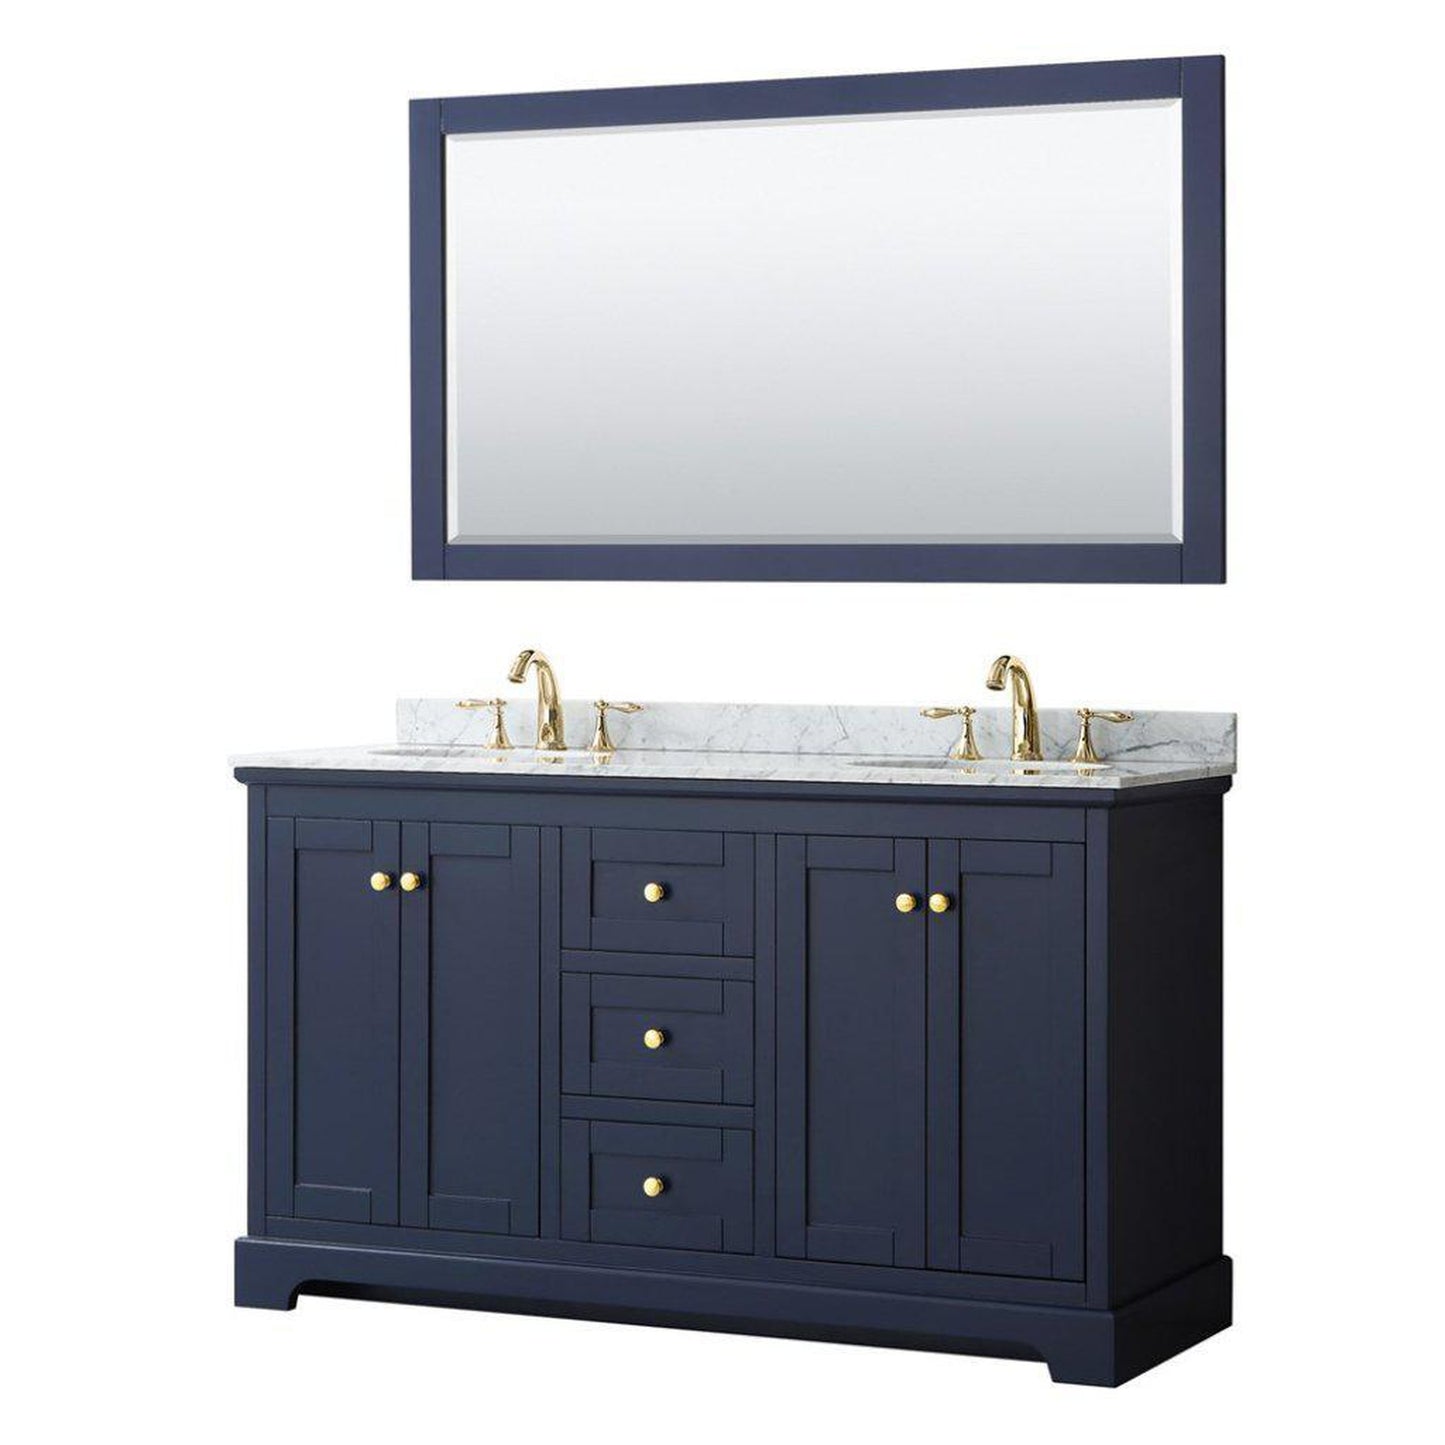 Wyndham Collection Avery 60" Dark Blue Double Bathroom Vanity Set With White Carrara Marble Countertop With 3-Hole Faucet And 8" Oval Sink And 58" Mirror